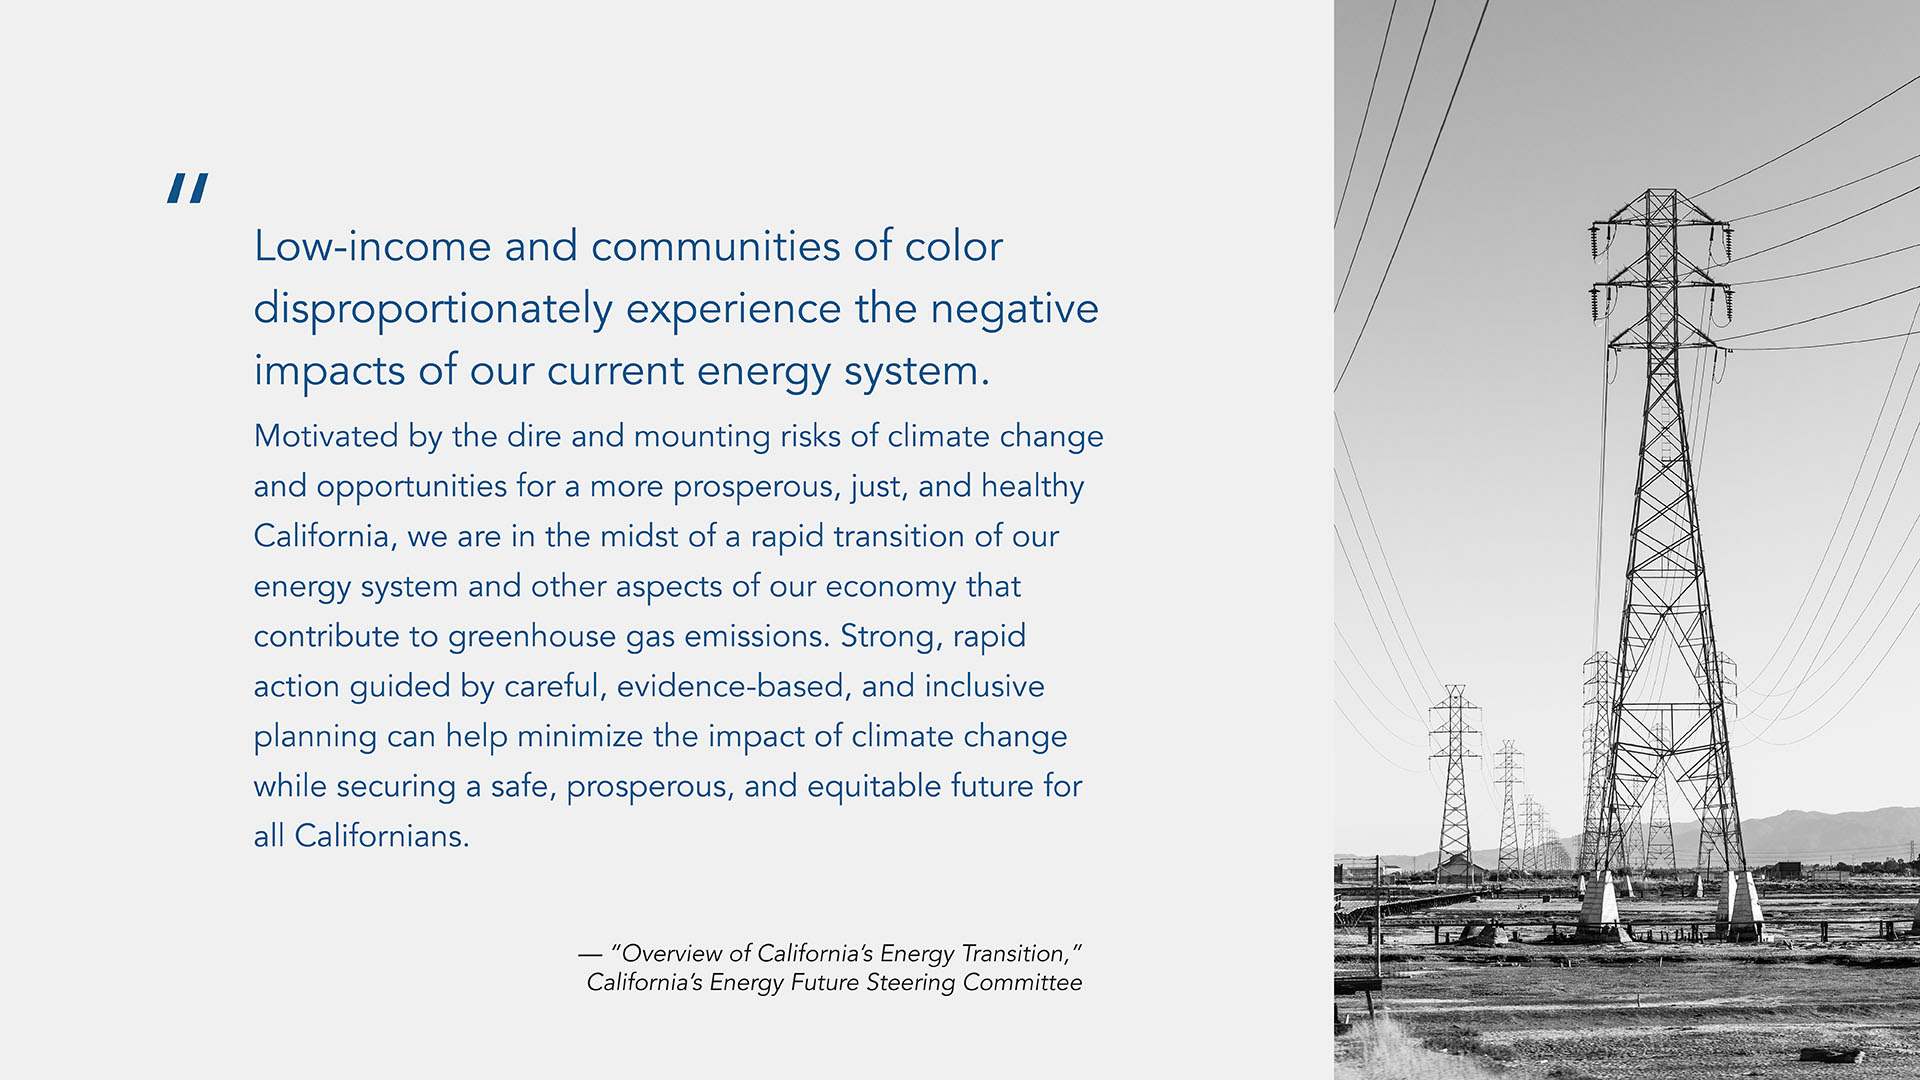 A quote graphic with a large quote in the first 2/3 of the graphic on a gray background with a black and white image in of a transmission line on the right column: "Low-income and communities of color disproportionately experience the negative impacts of our current energy system. Motivated by the dire and mounting risks of climate change and opportunities for a more prosperous, just, and healthy California, we are in the midst of a rapid transition of our energy system and other aspects of our economy that contribute to greenhouse gas emissions. Strong, rapid action guided by careful, evidence-based, and inclusive planning can help minimize the impact of climate change while securing a safe, prosperous, and equitable future for all Californians."